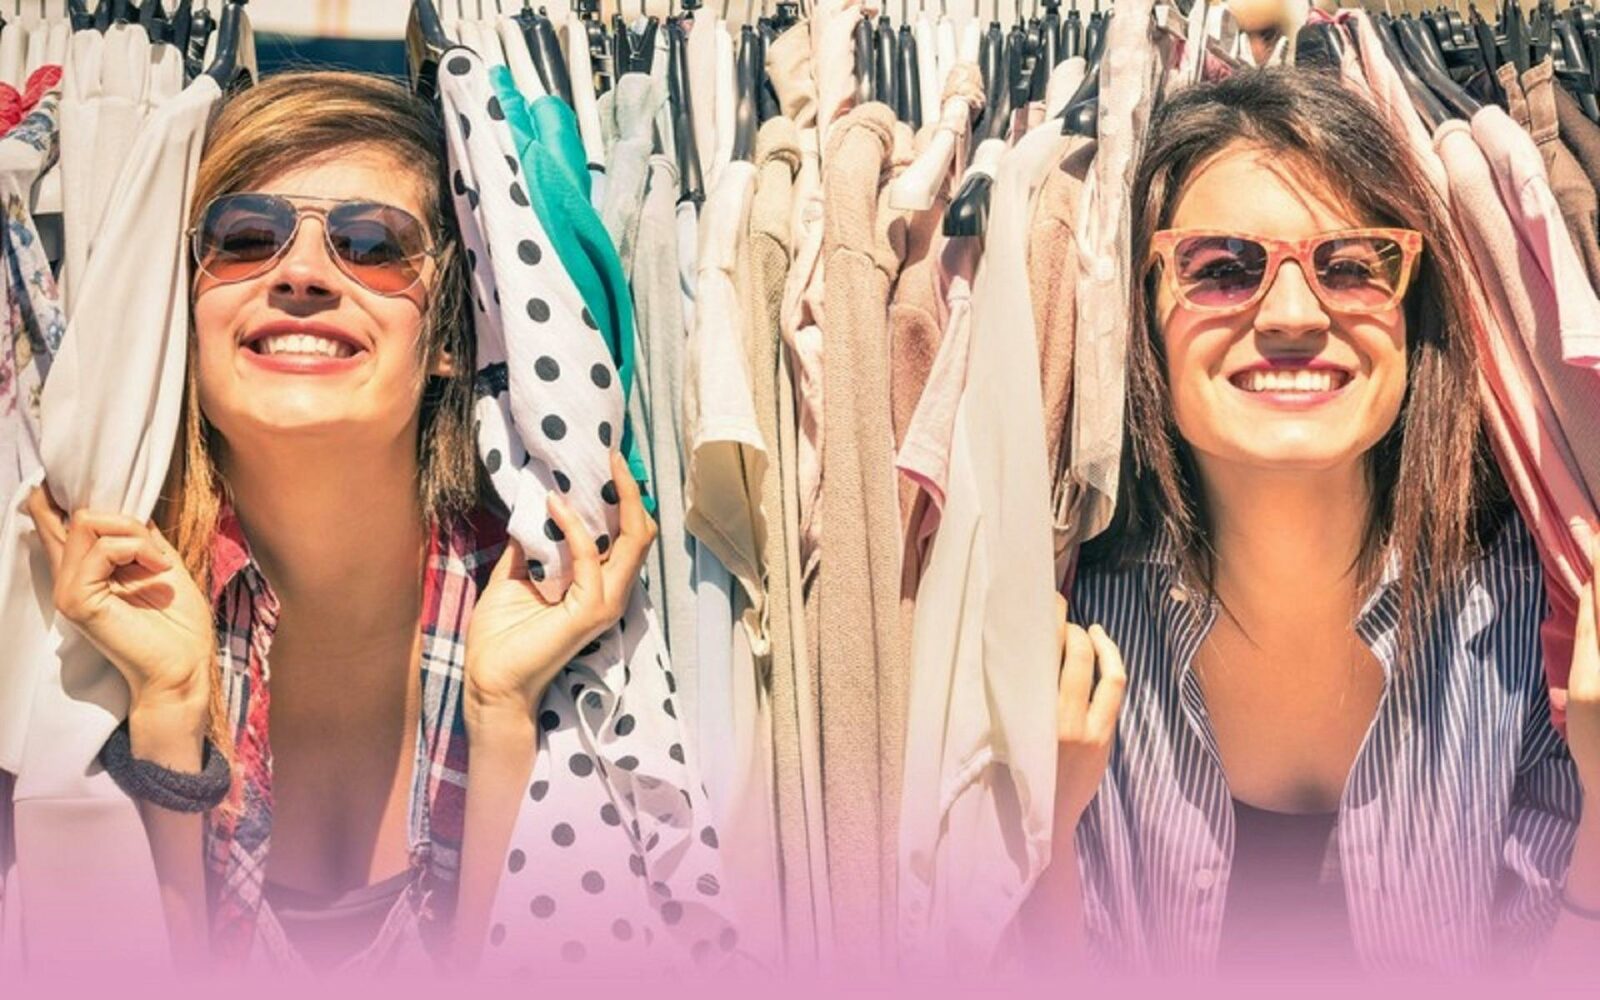 Two women wearing sunglasses and smiling while poking their heads through a rack of clothing